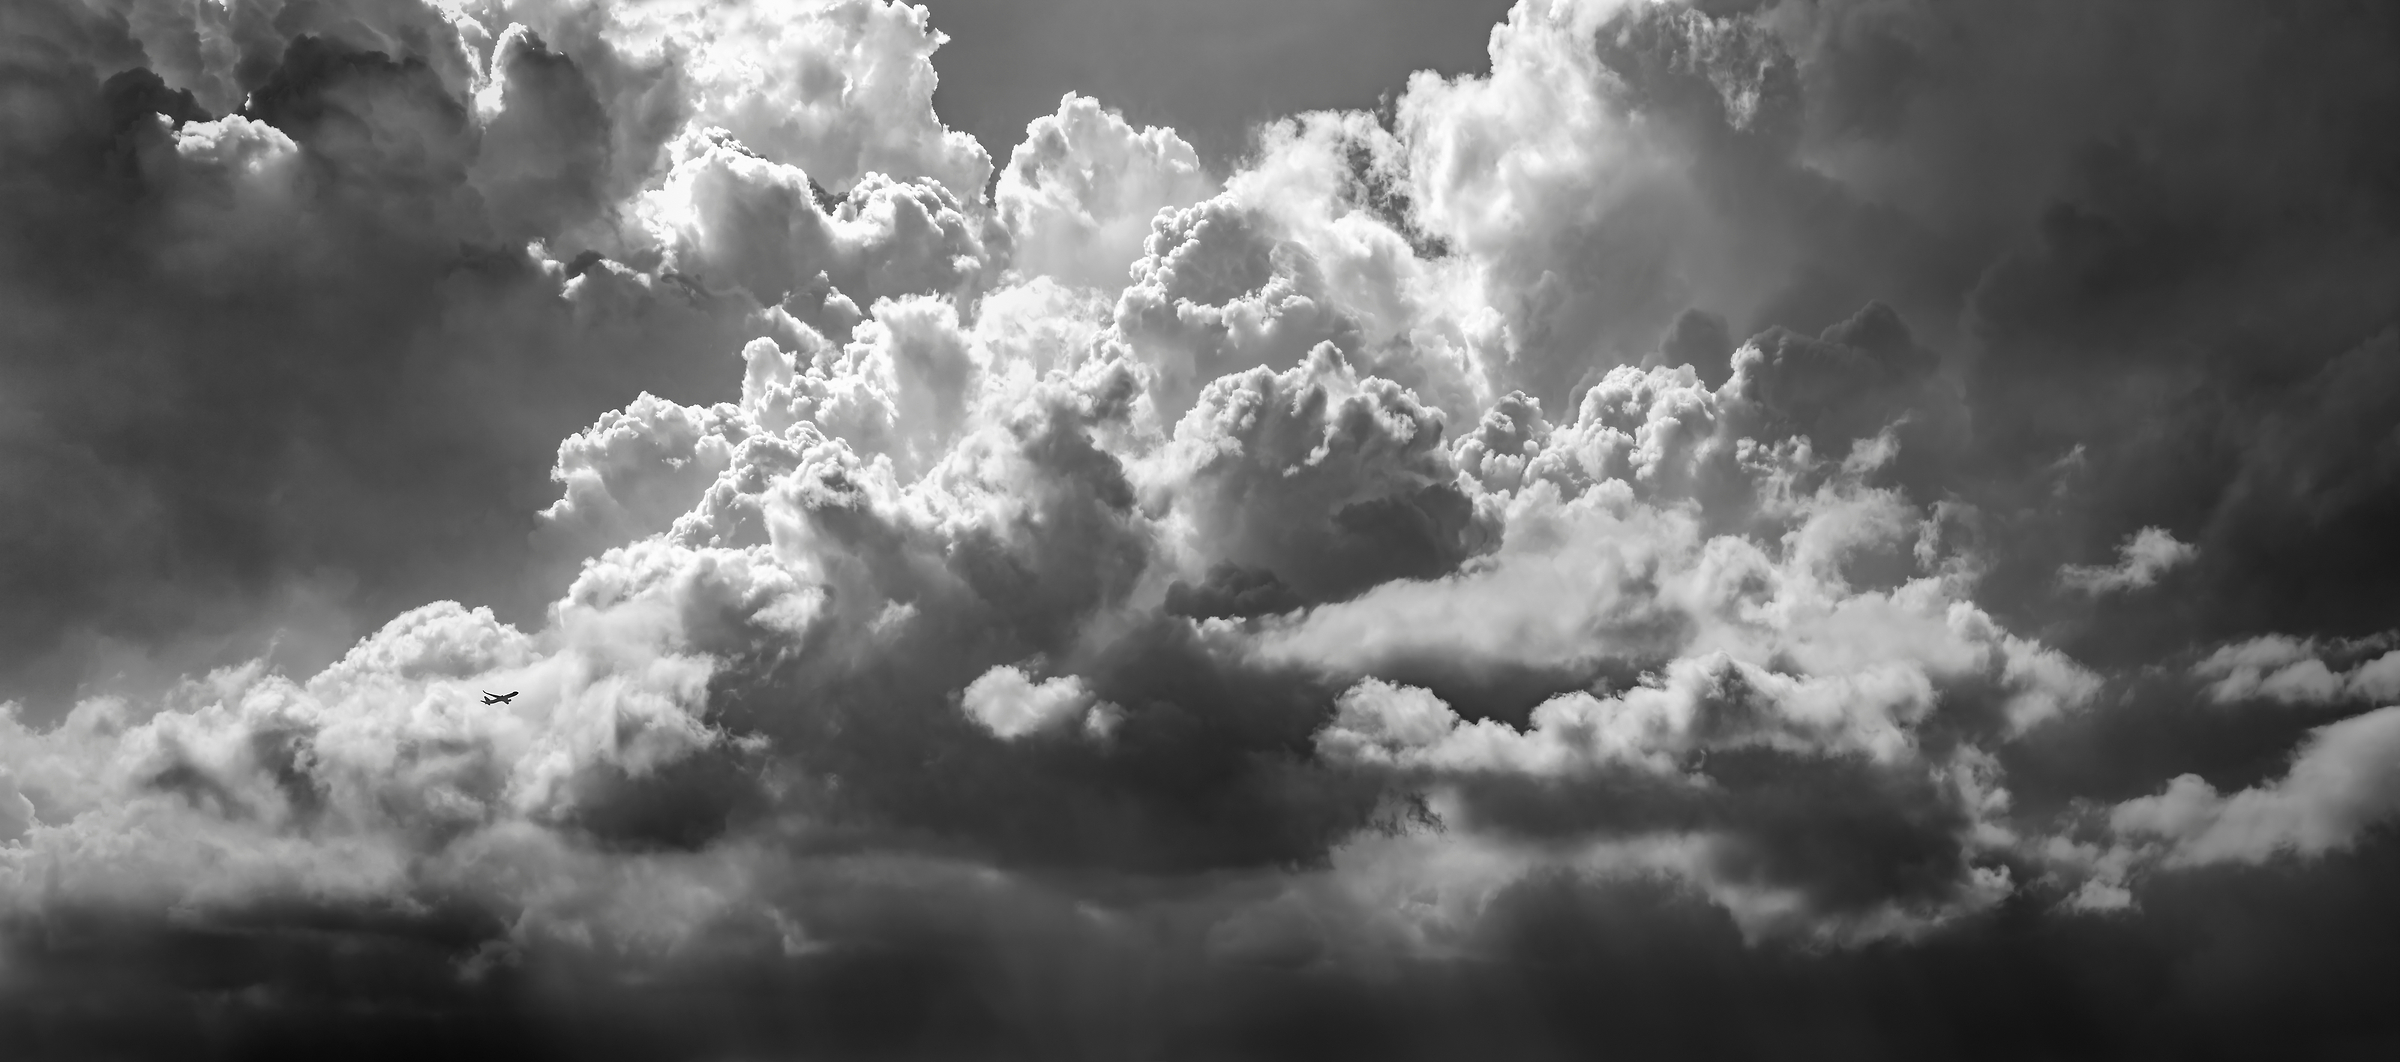 452 megapixels! A very high resolution, large-format, black & white VAST photo print of clouds; photograph created by Dan Piech in New York City